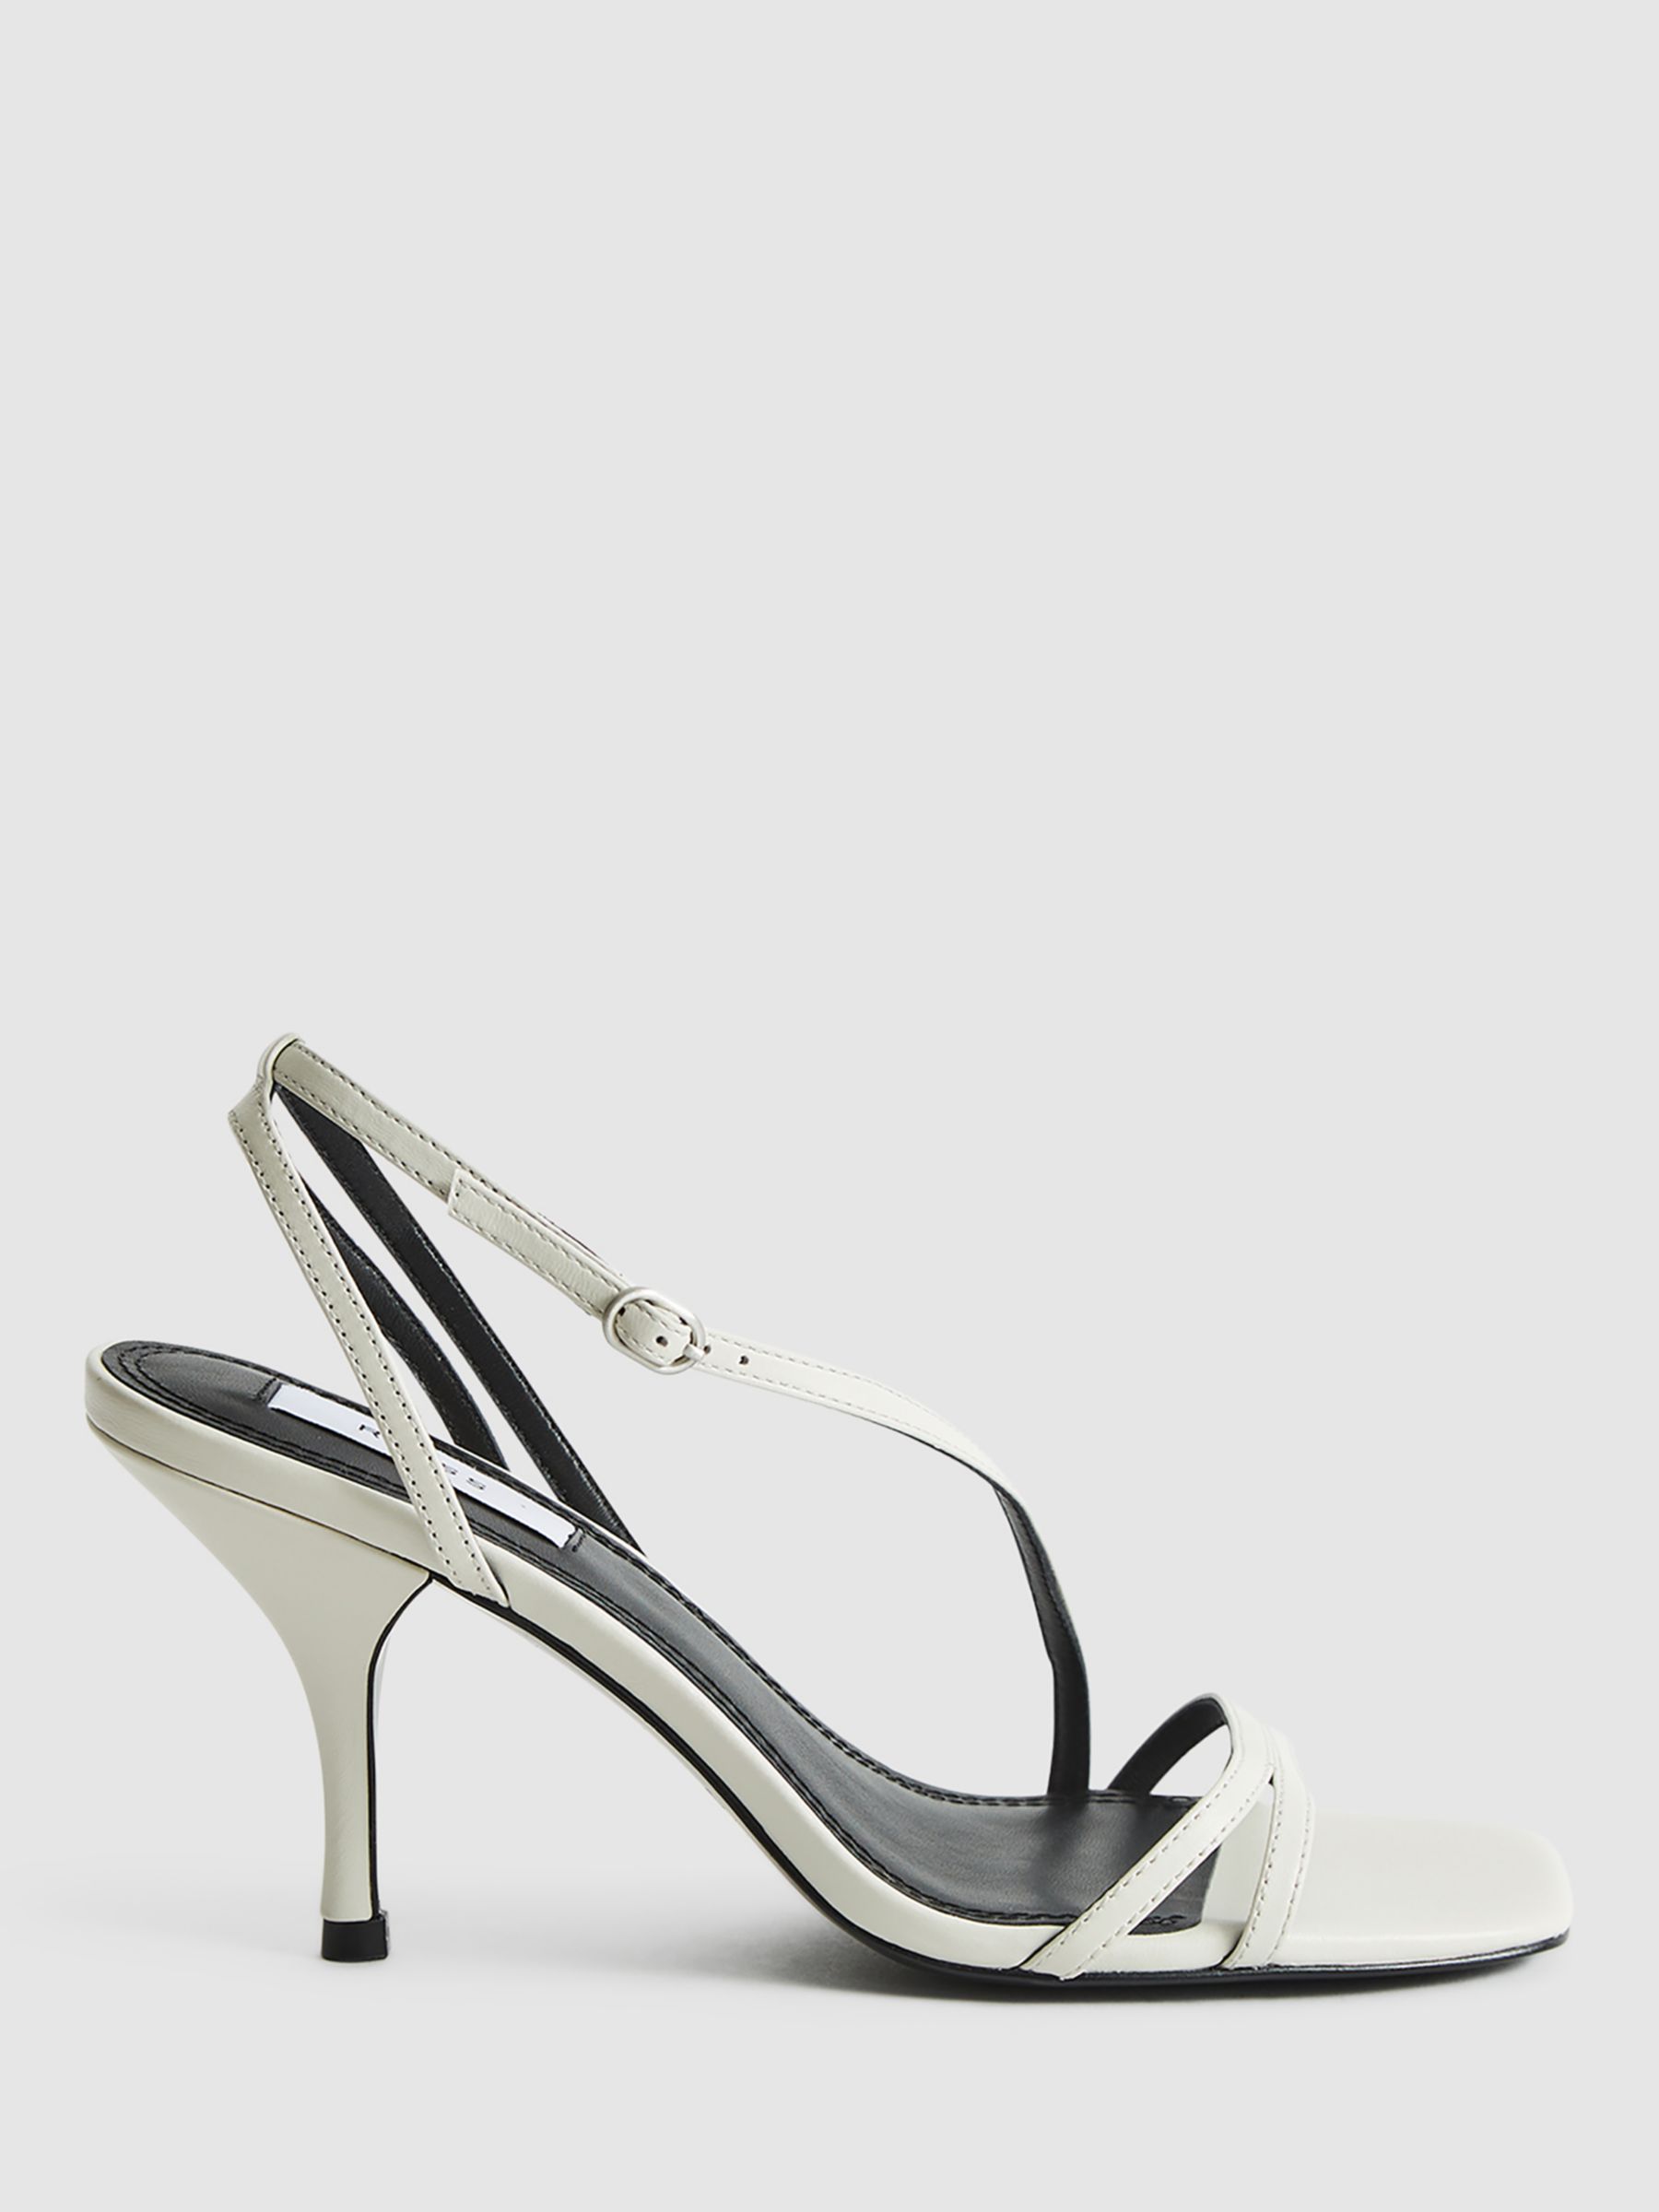 Reiss Bali Leather Strappy Sandals